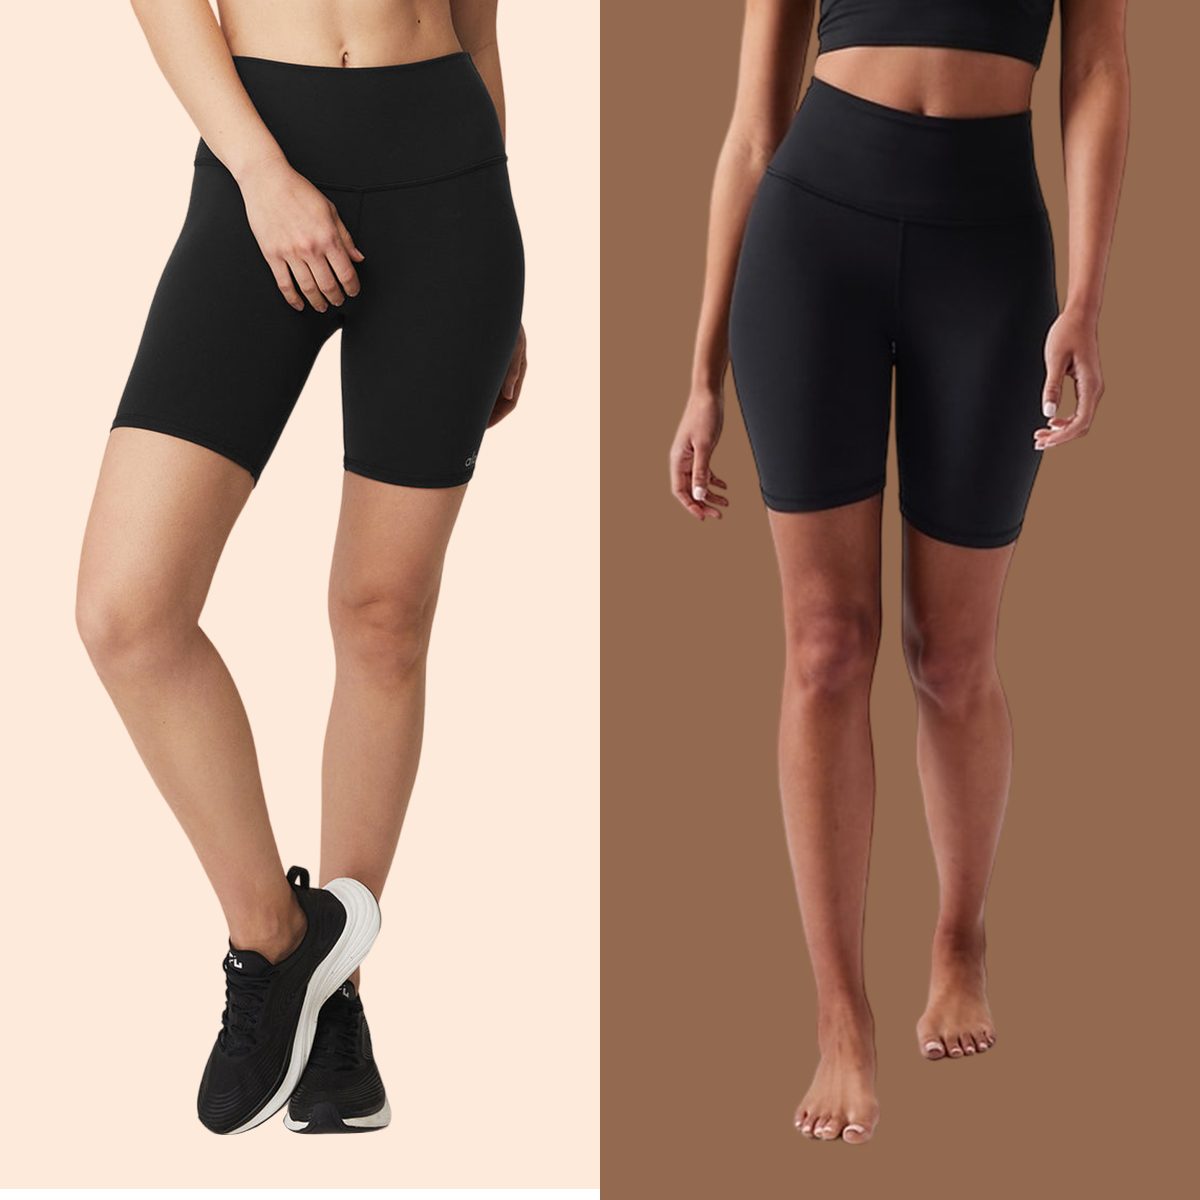 These Comfy Shorts Are The Easiest Way To Prevent Chafing While